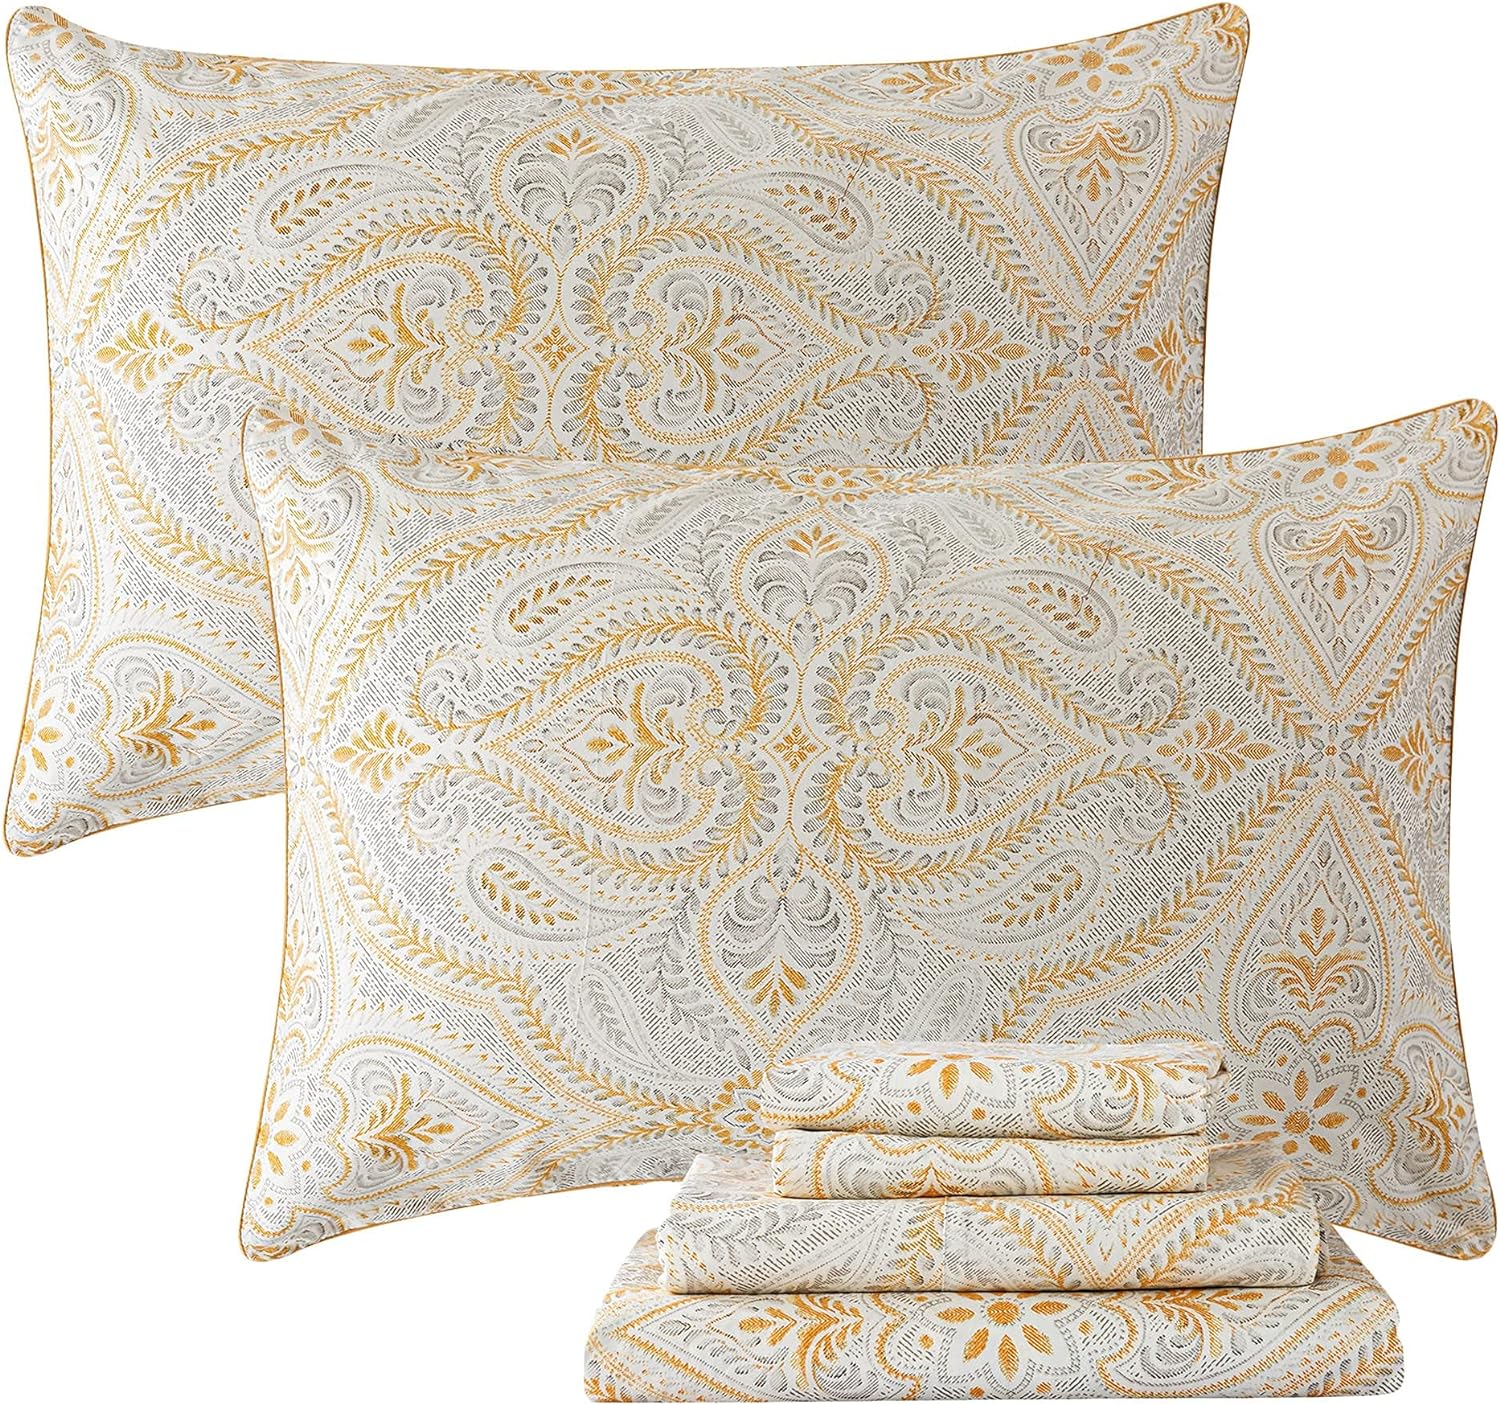 FADFAY Luxury Sheets Set Twin Classical Damask Paisley Bedding Luxurious Gold Classy Paisley Bed Sheet Set Breathable 100% Cotton Ultra Soft Hypoallergenic Deep Pocket Fitted Sheet 4Pcs, Twin Size